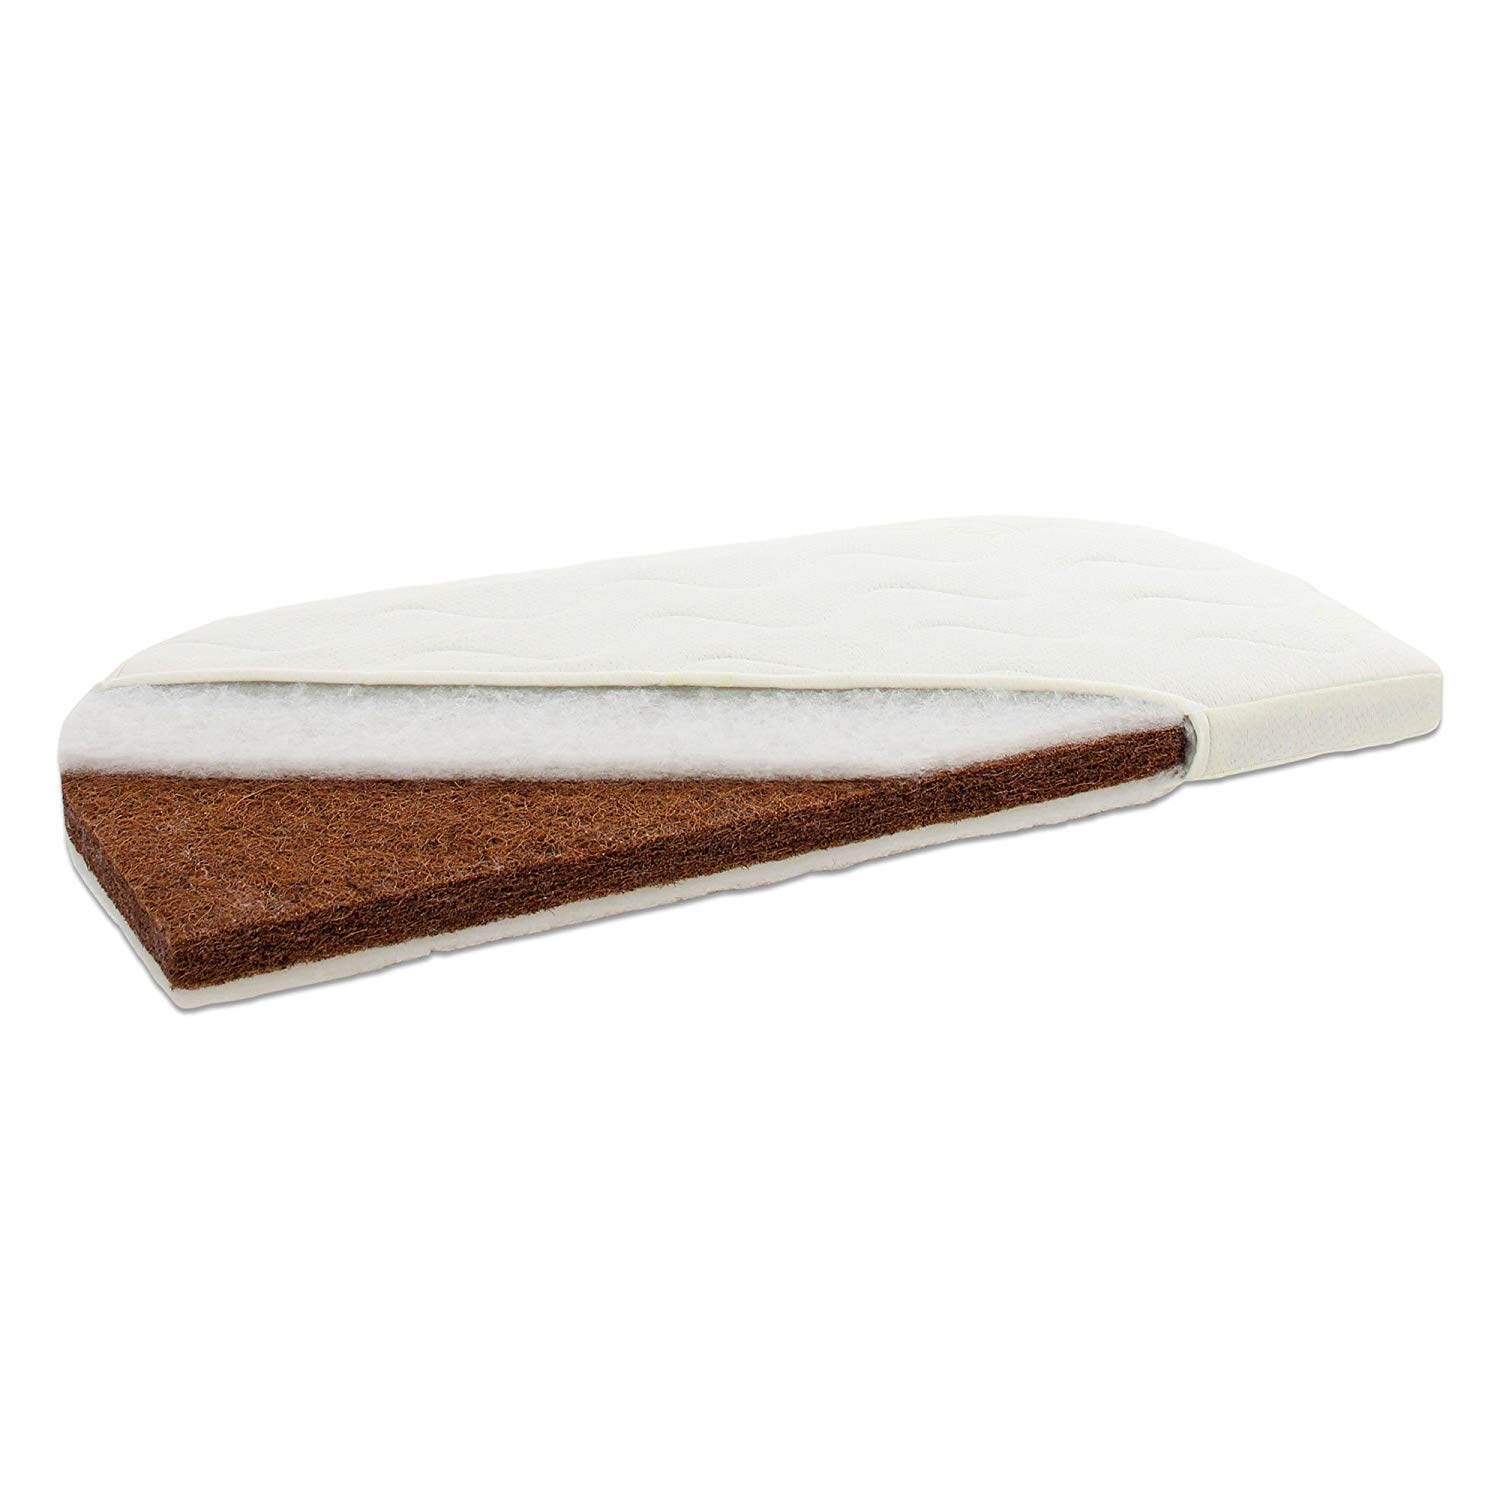 babybay Greenfirst Coconut Mattress Suitable for Comfort and Boxspring Comfort